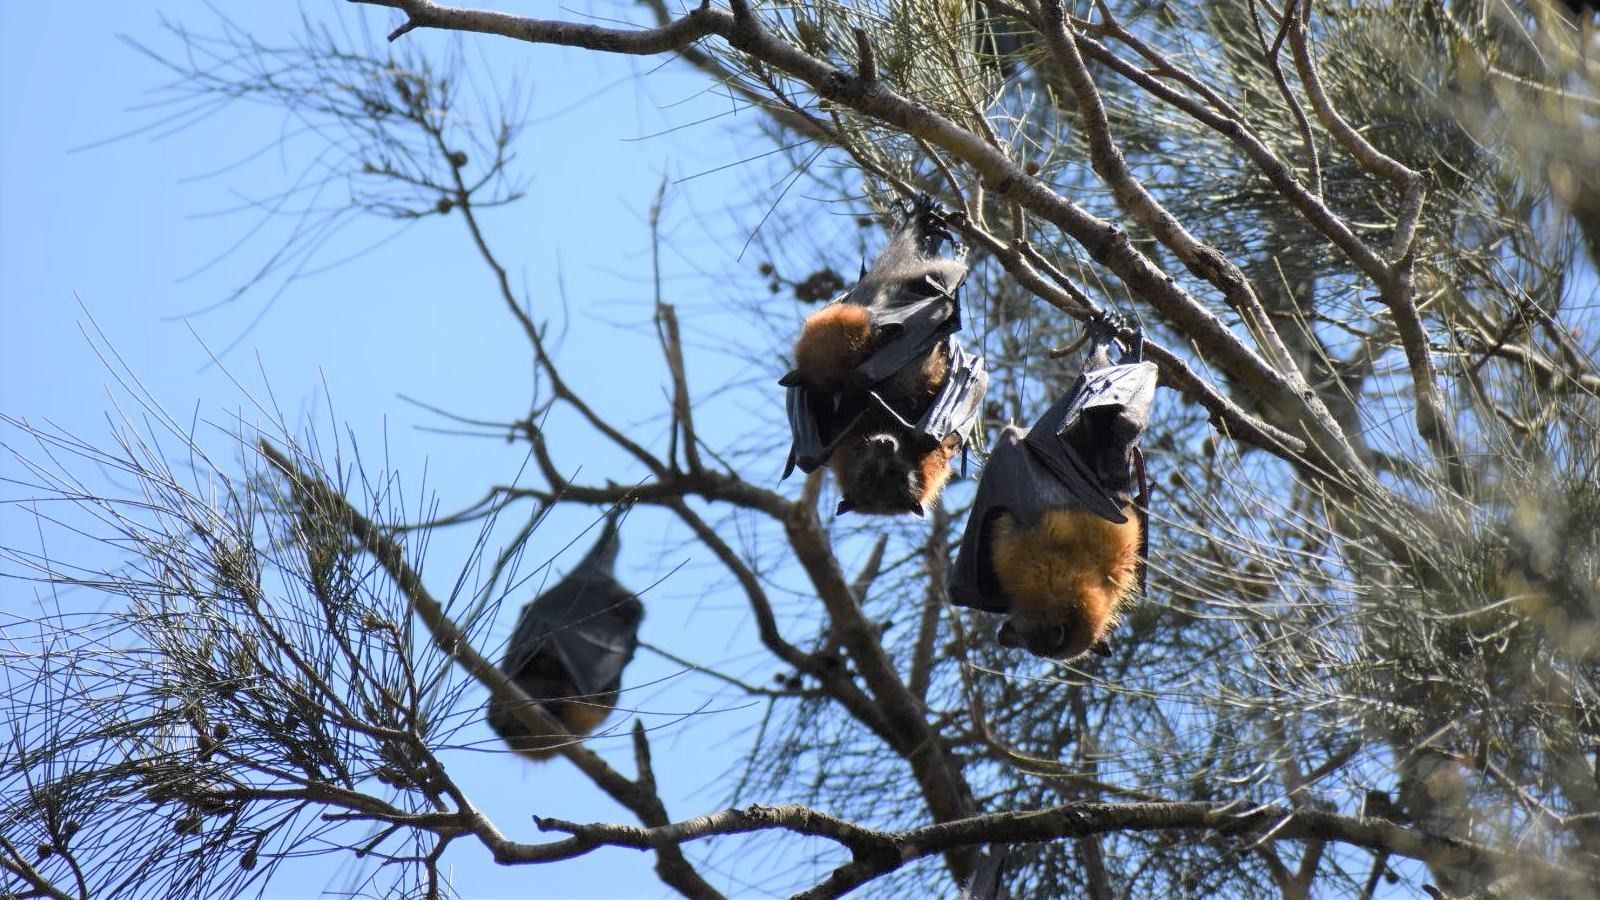 Three flying foxes hanging upside down on a tree branch banner image